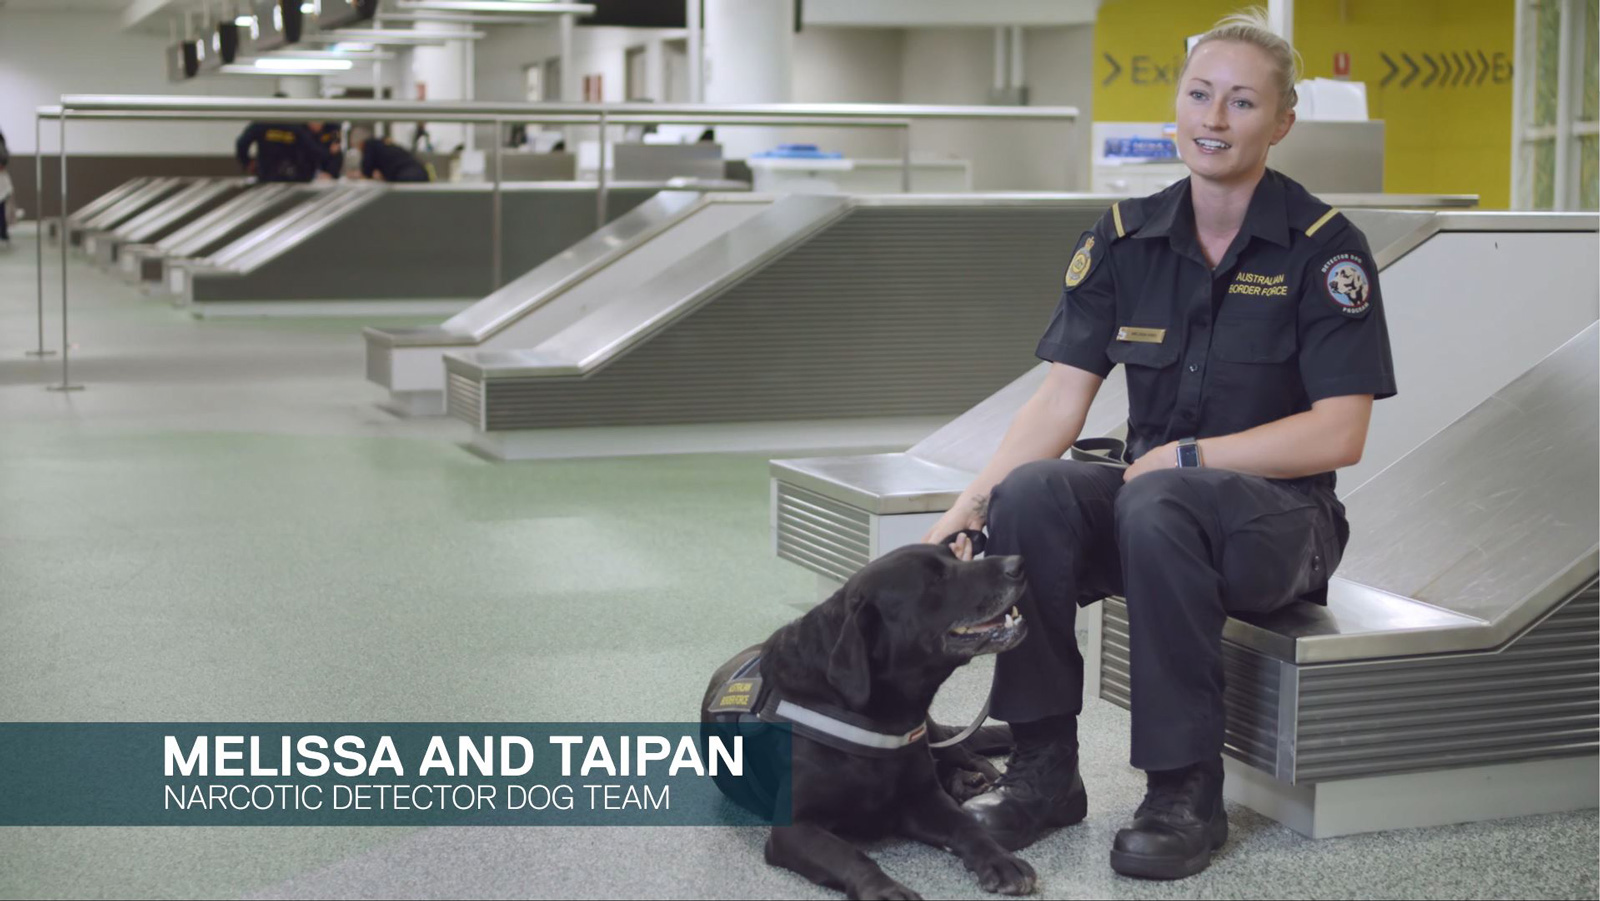 Melissa and Taipan work together to detect to detect cannabis, cocaine, ice, ecstasy, heroin and pseudoephedrine